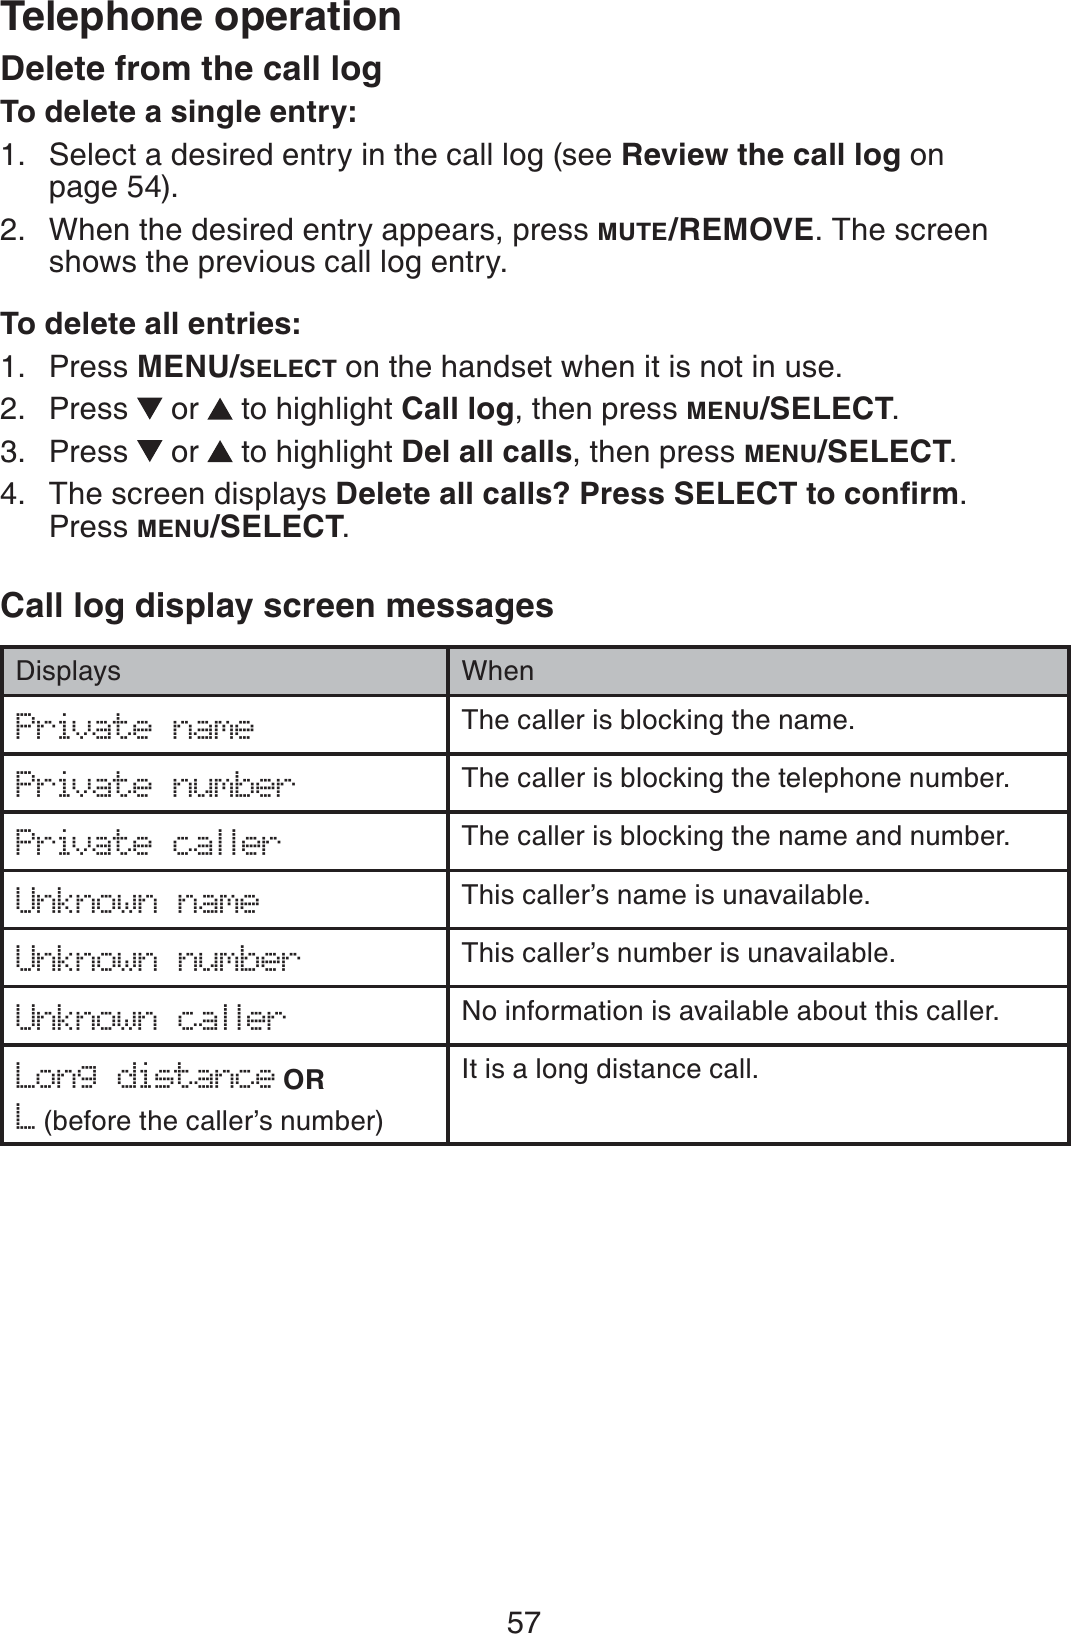 57Telephone operationDelete from the call logTo delete a single entry:Select a desired entry in the call log (see Review the call log on page 54).When the desired entry appears, press MUTE/REMOVE. The screen shows the previous call log entry.To delete all entries:Press MENU/SELECT on the handset when it is not in use.Press  or  to highlight Call log, then press MENU/SELECT.Press  or  to highlight Del all calls, then press MENU/SELECT.The screen displays &amp;GNGVGCNNECNNU!2TGUU5&apos;.&apos;%6VQEQPſTO.Press MENU/SELECT.Call log display screen messages1.2.1.2.3.4.Displays WhenPrivate name The caller is blocking the name.Private number The caller is blocking the telephone number.Private caller The caller is blocking the name and number. Unknown name  This caller’s name is unavailable. Unknown number   This caller’s number is unavailable.Unknown caller No information is available about this caller.Long distance ORL (before the caller’s number) It is a long distance call.